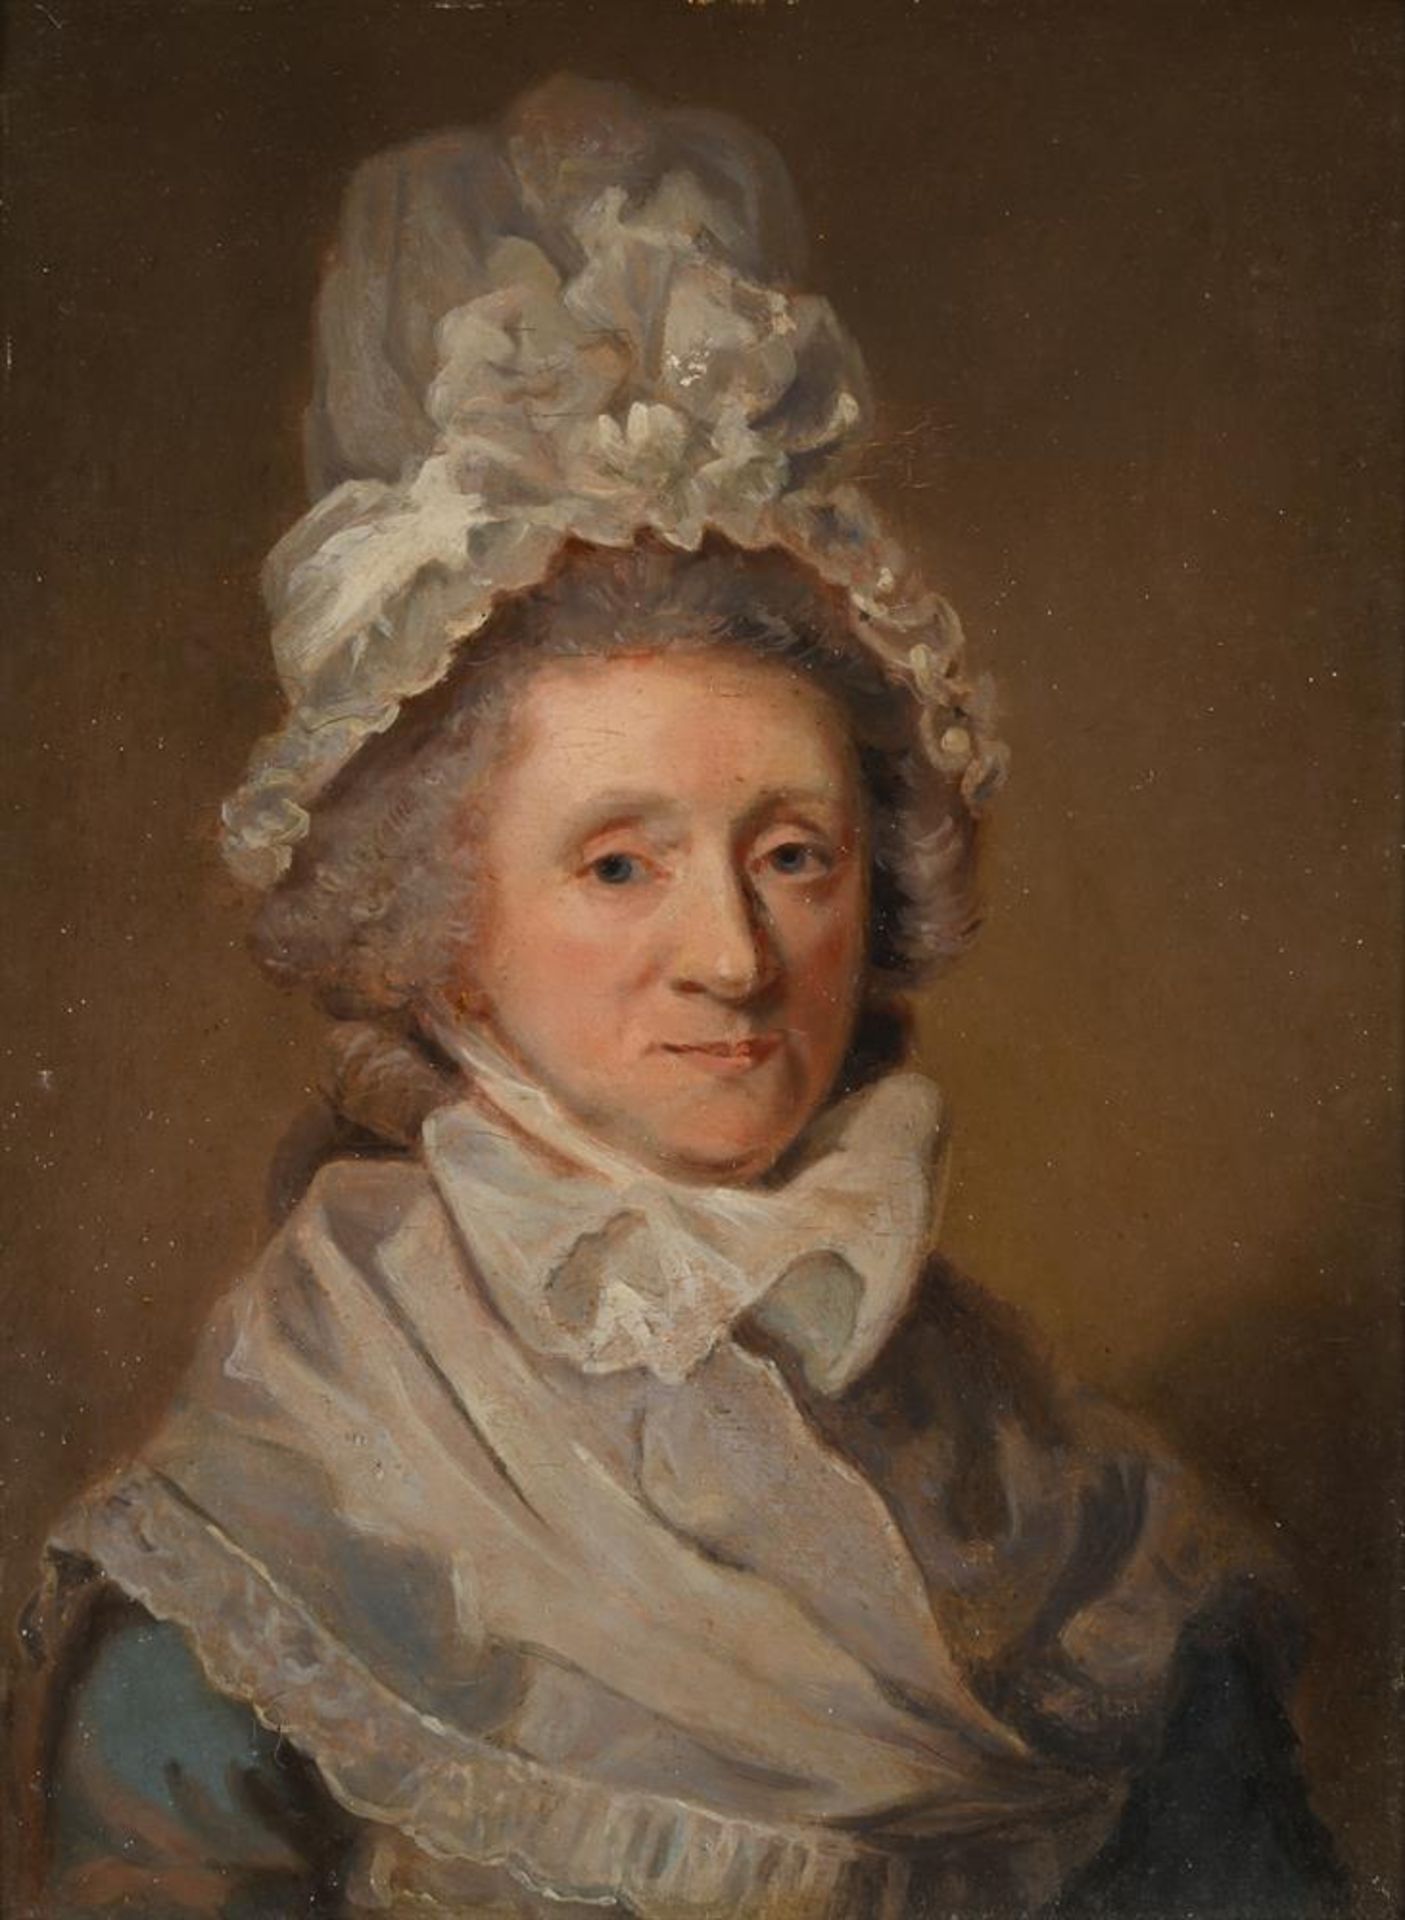 ATTRIBUTED TO HENRY WALTON (BRITISH 1746-1813), PORTRAIT OF A LADY